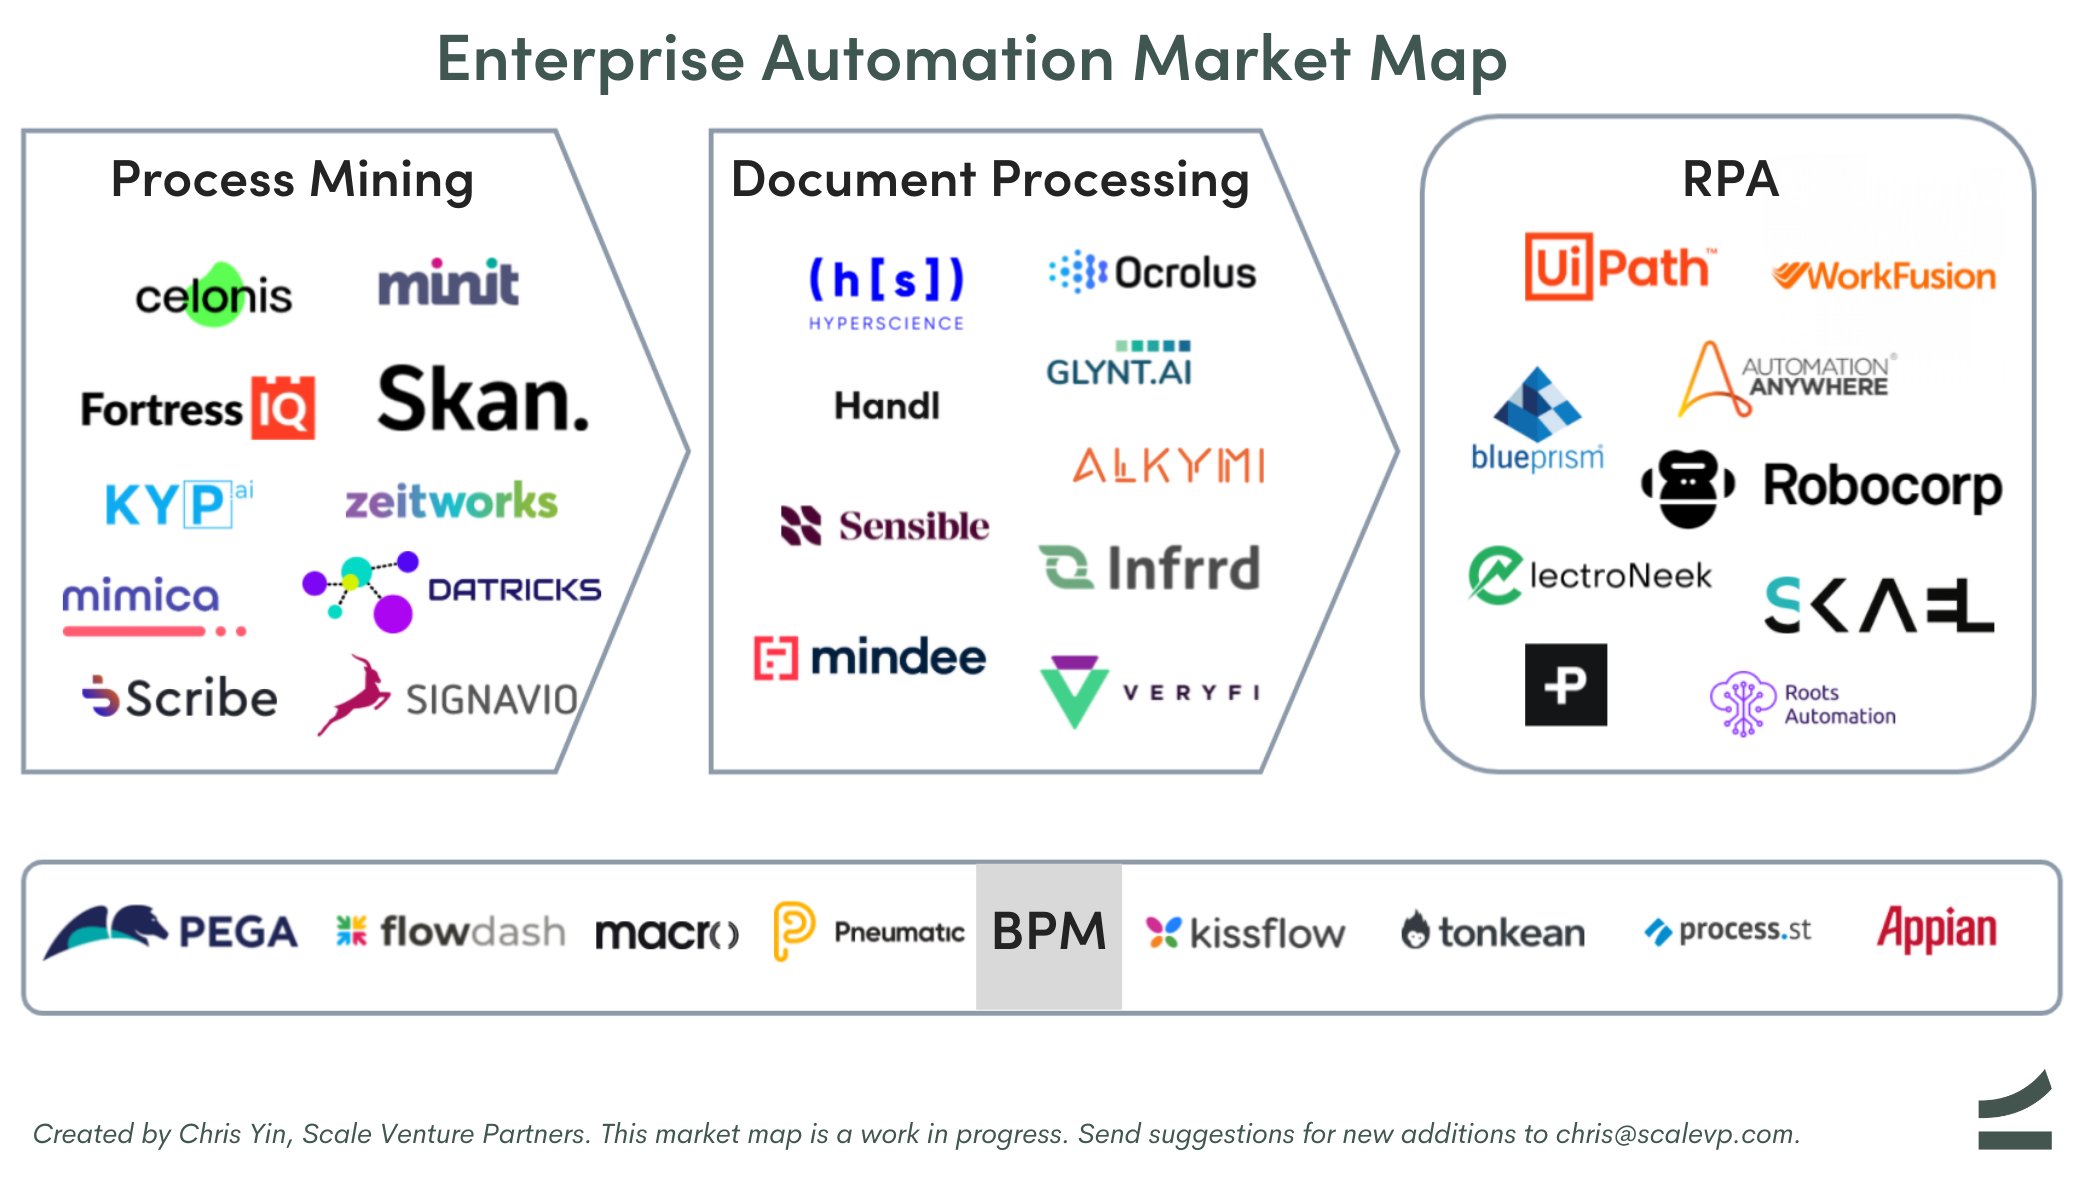 Enterprise Automation Market Map covering process mining, document processing, RPA, and BPM